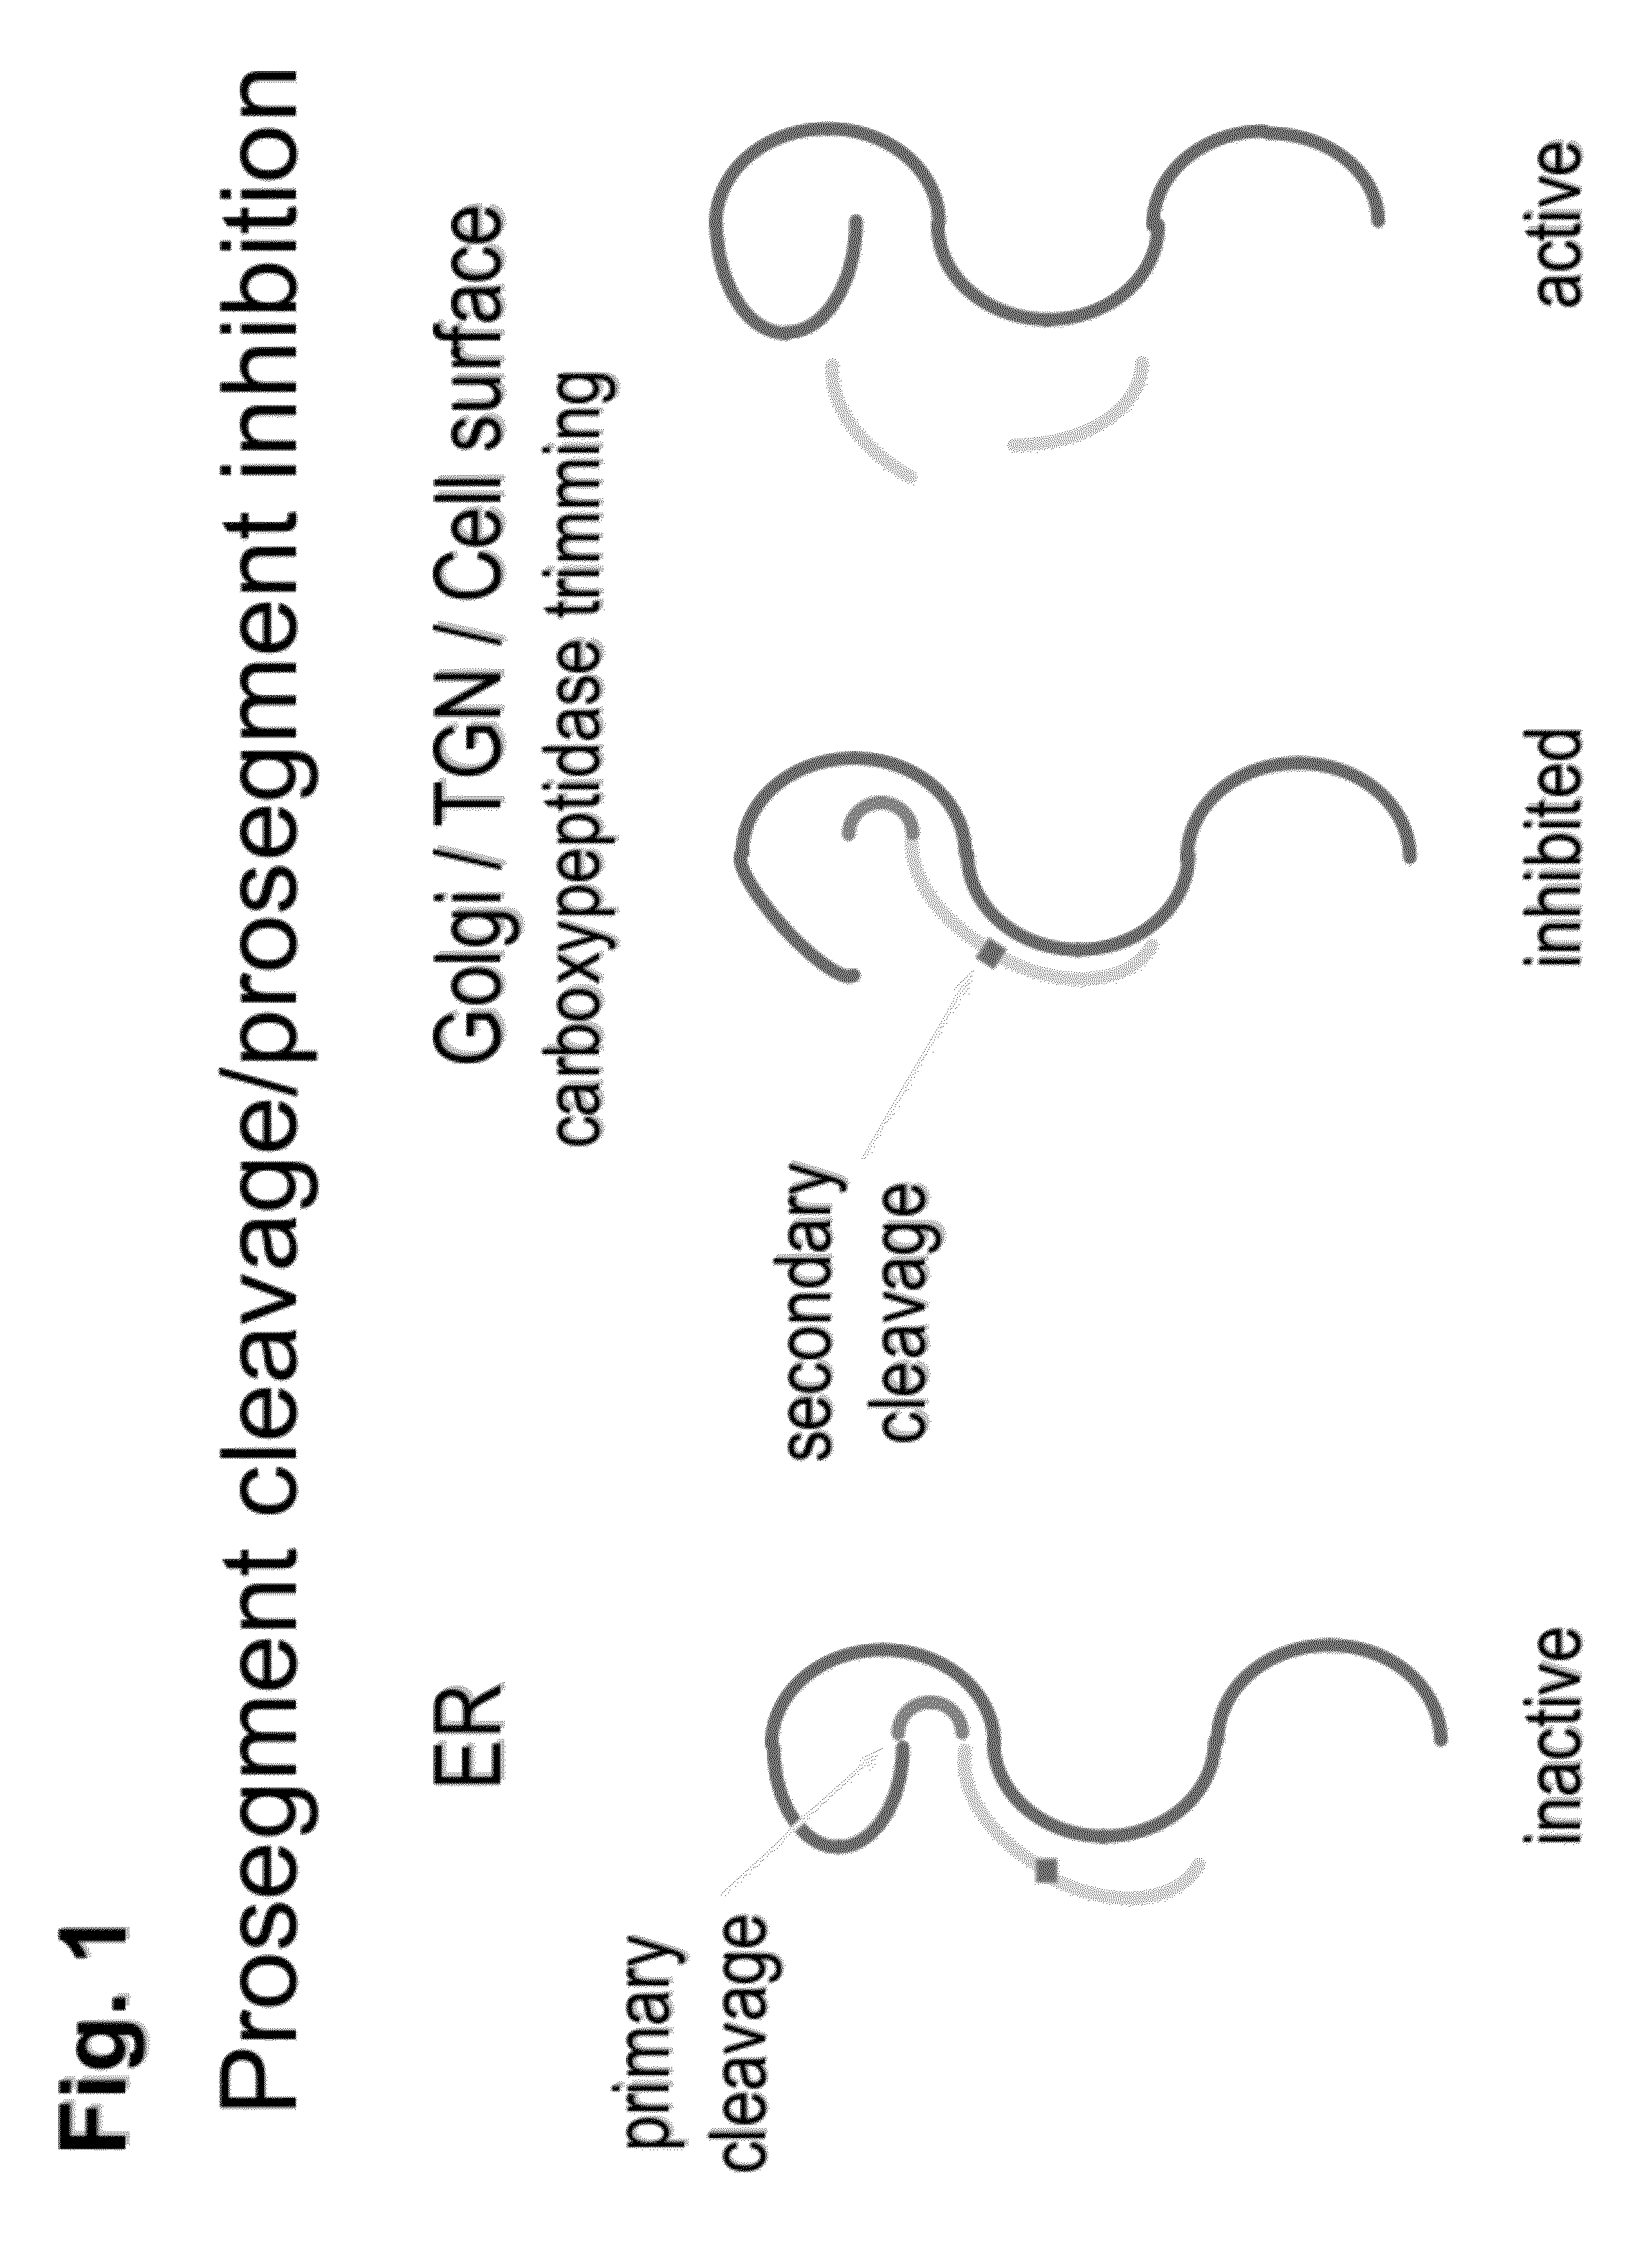 Chimeric pcsk9 proteins, cells comprising same, and assays using same